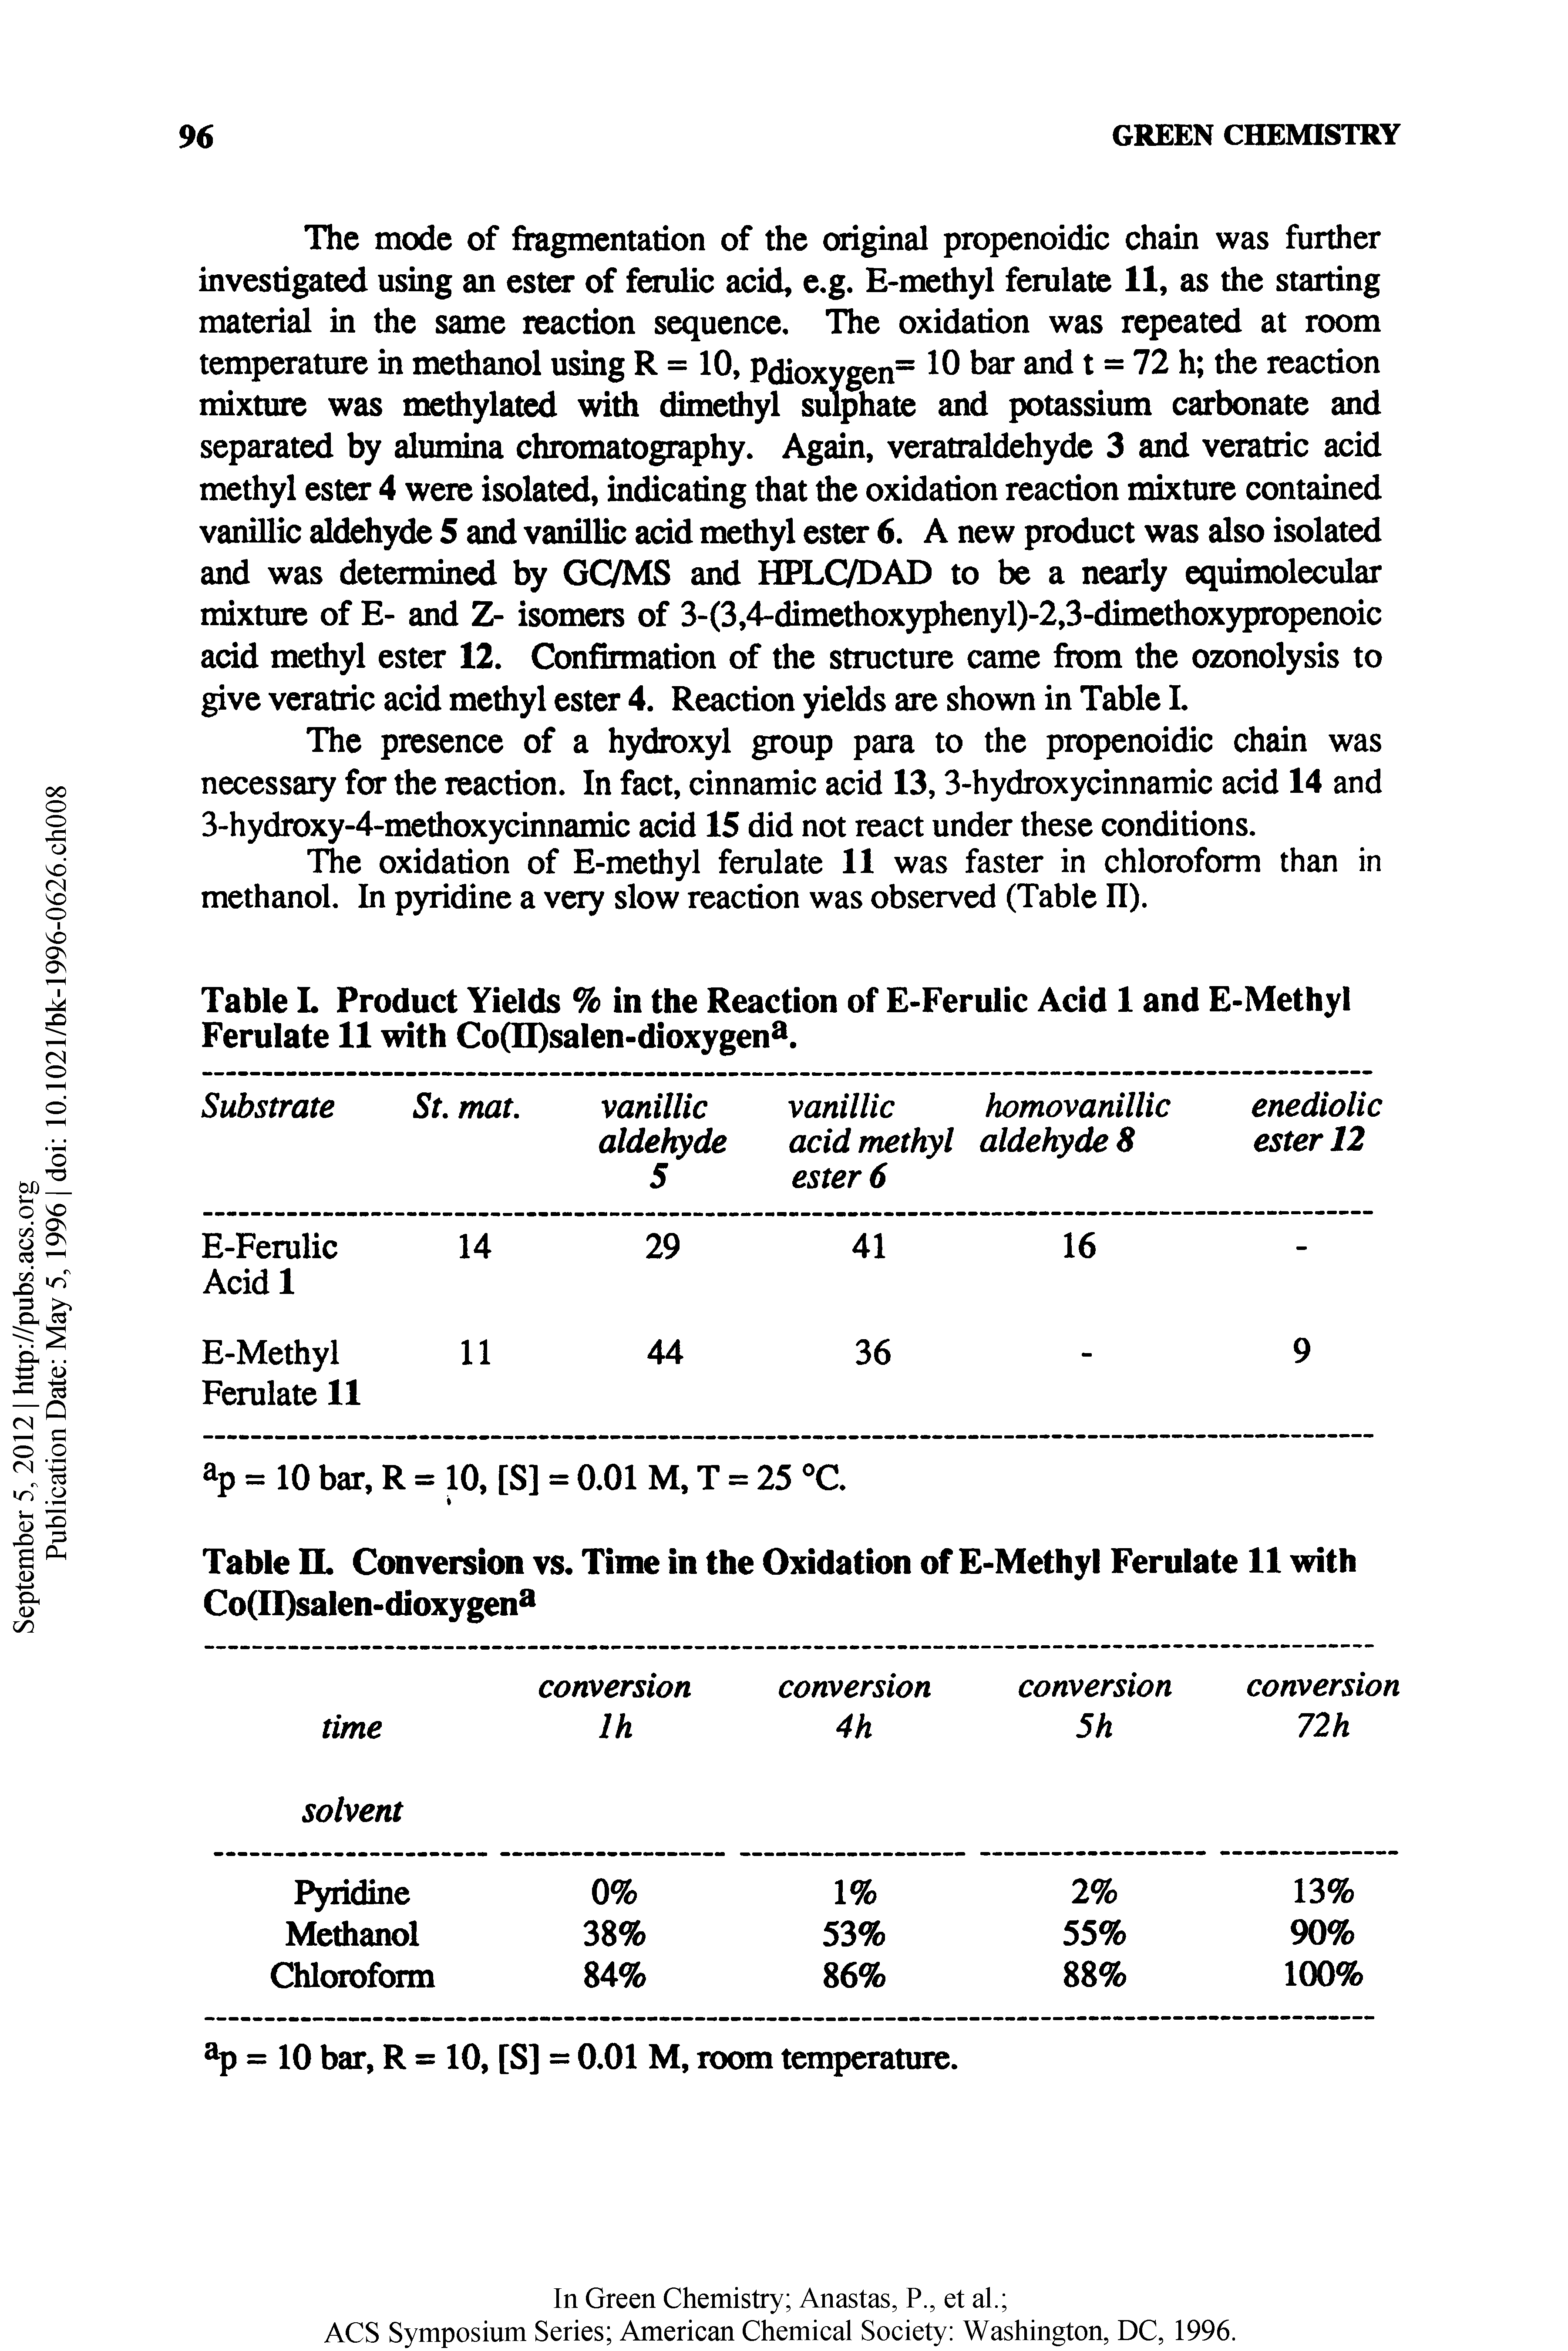 Table L Product Yields % in the Reaction of E-Ferulic Acid 1 and E-Methyl Ferulate 11 with Co(II)salen-dioxygen. ...